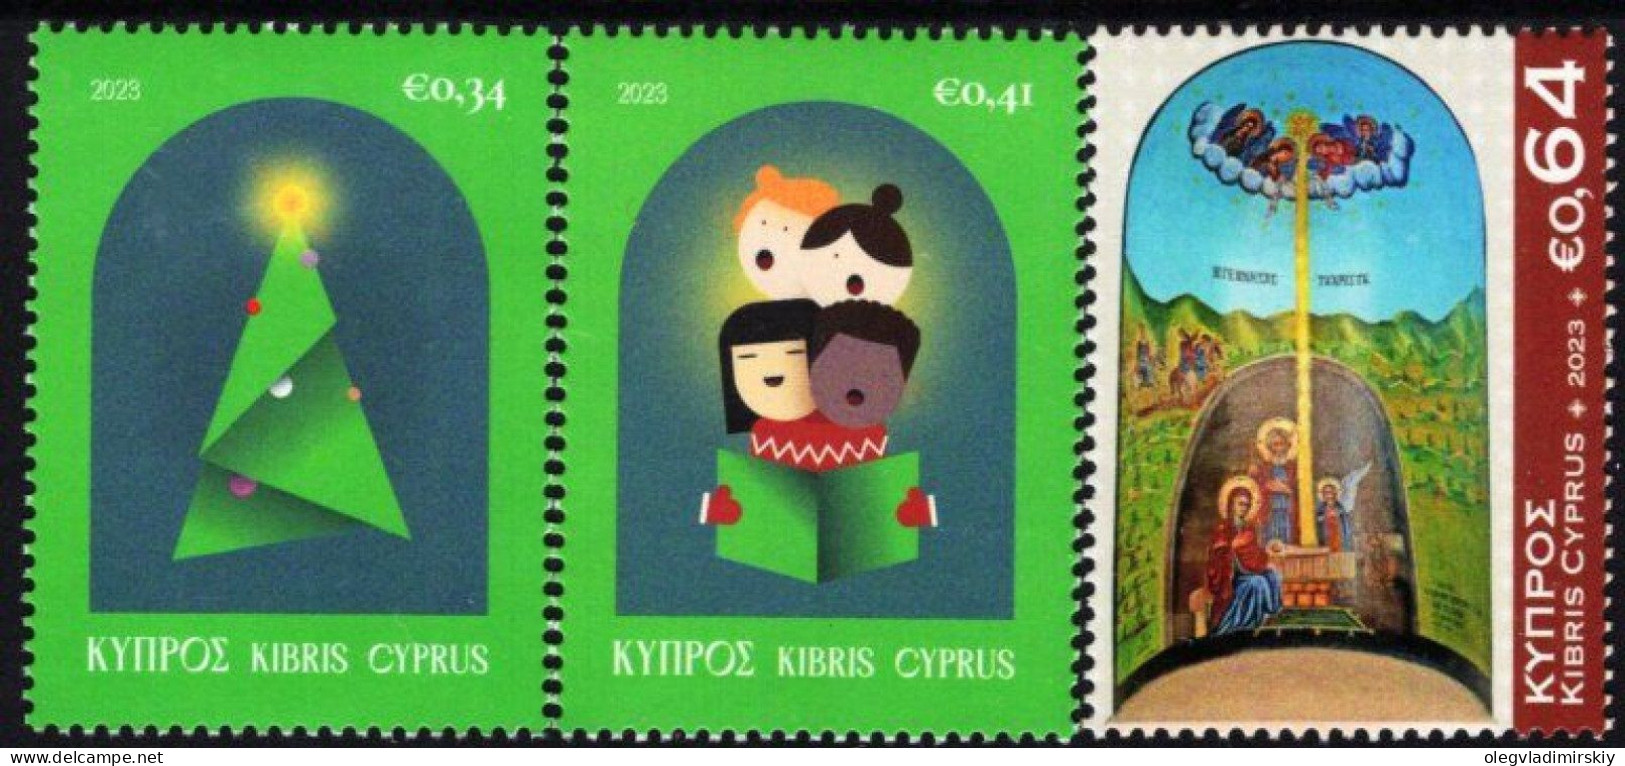 Cyprus 2023 Merry Christmas And Happy New Year Set Of 3 Stamps MNH - Christmas